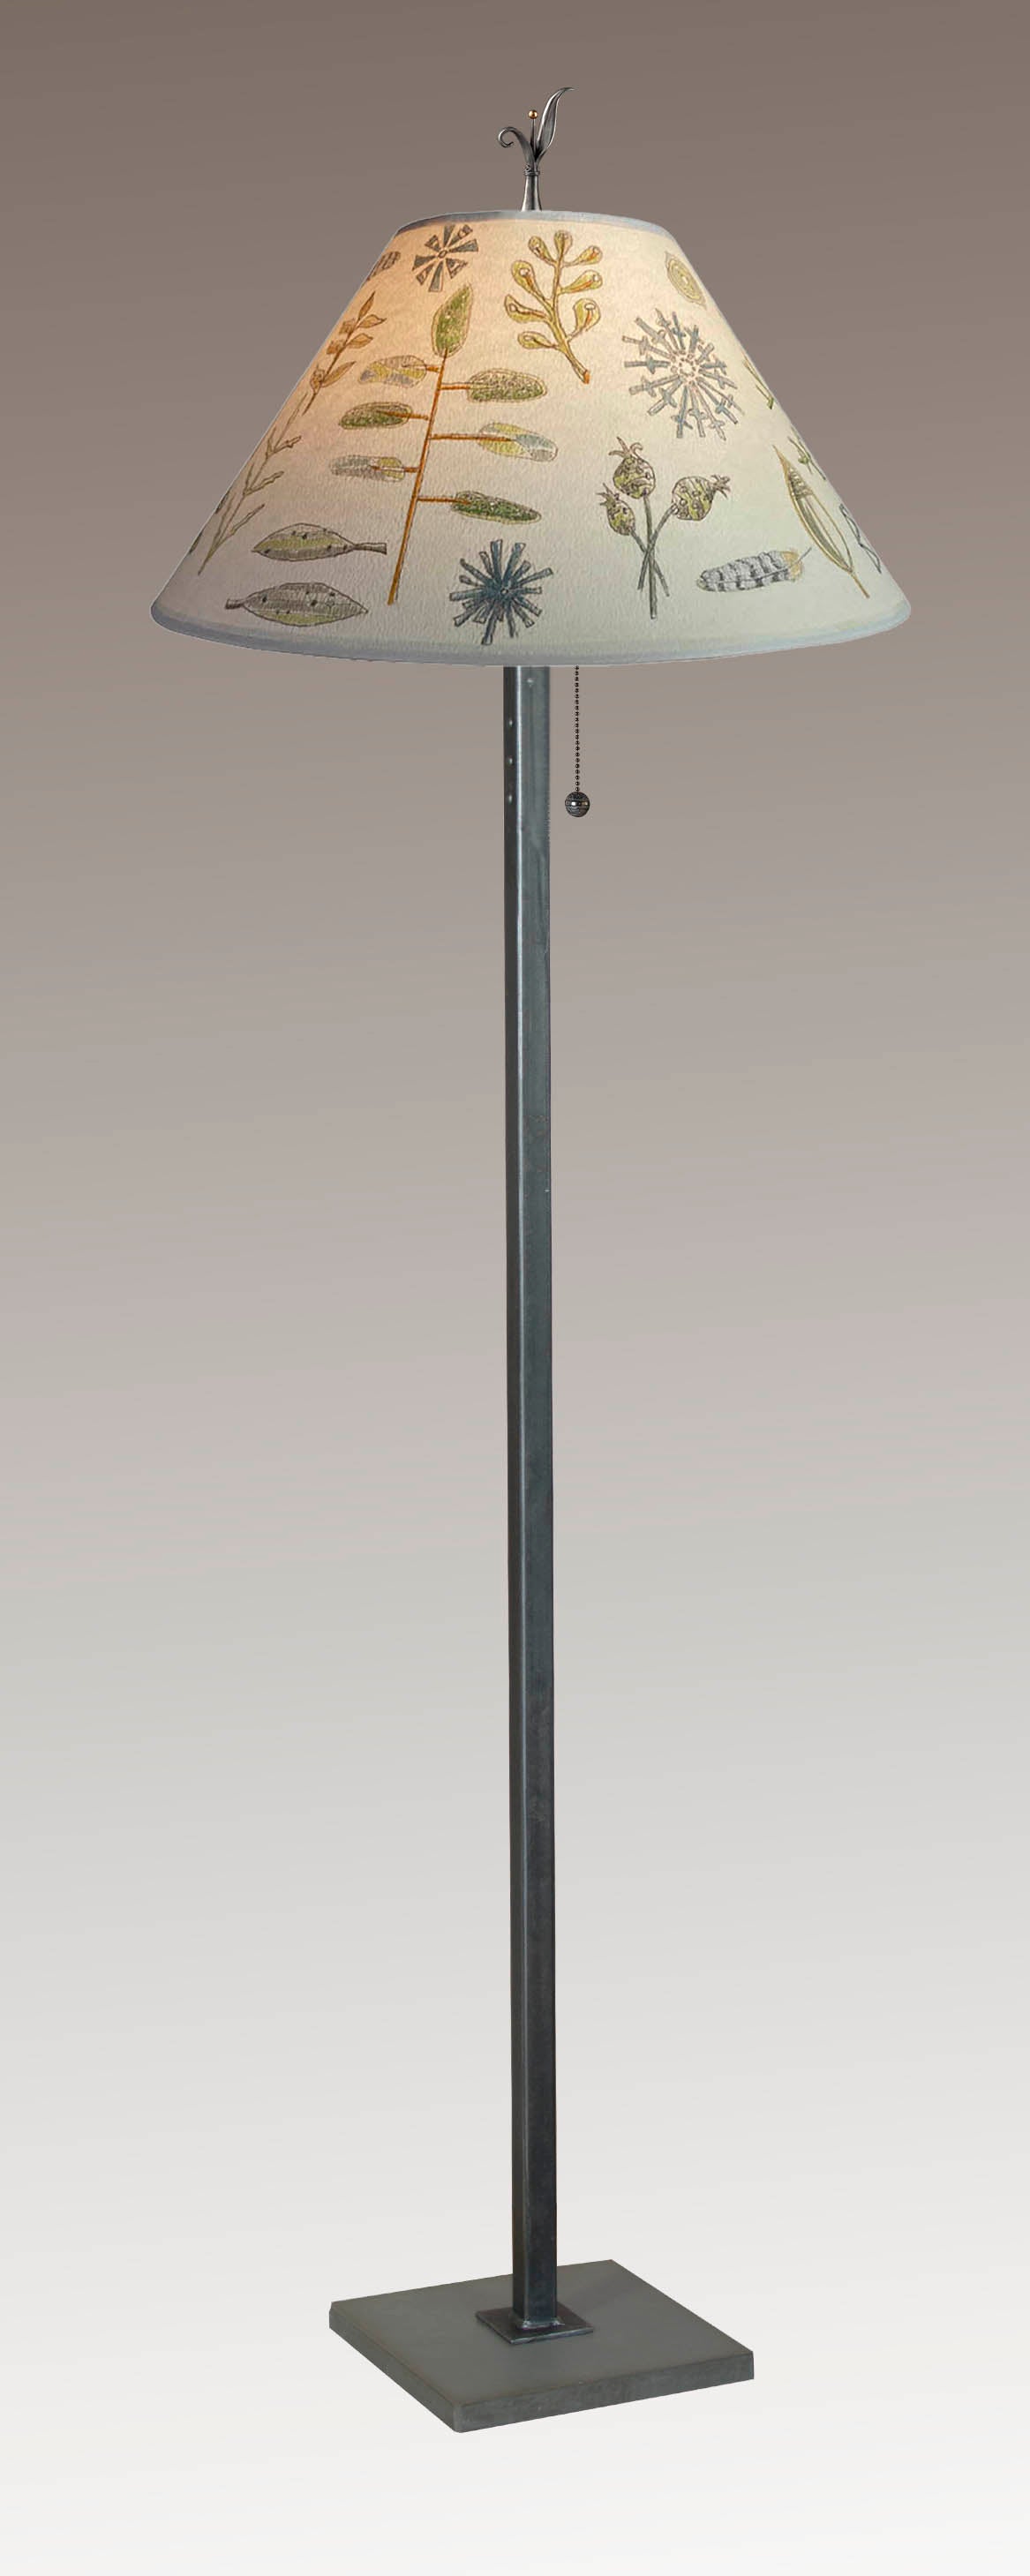 Janna Ugone & Co Floor Lamp Steel Floor Lamp with Large Conical Shade in Field Chart